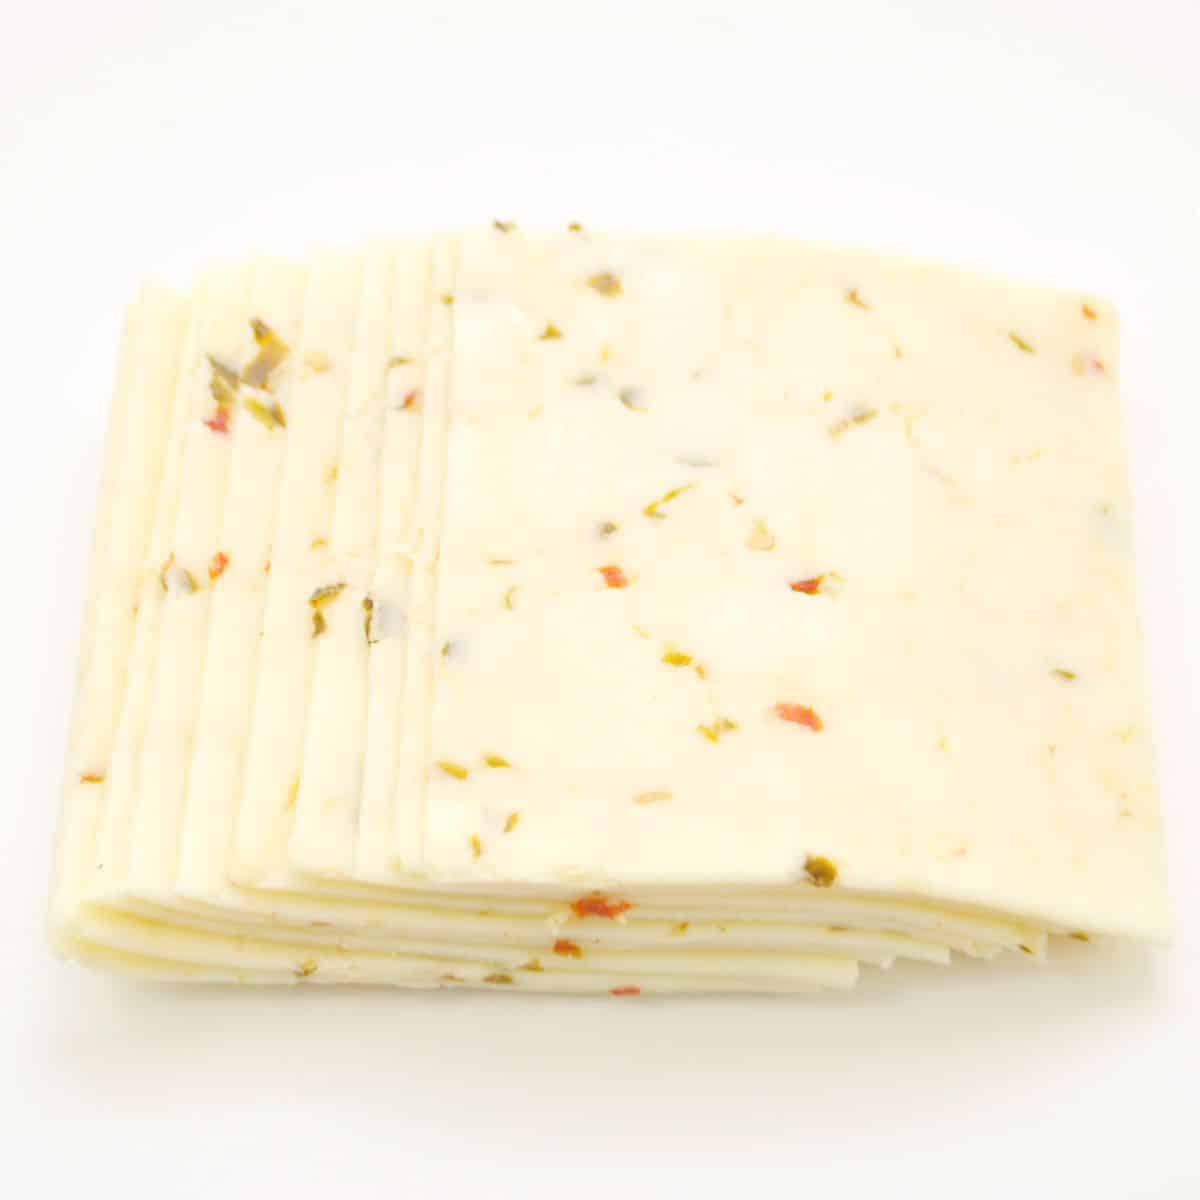 Slices of pepper jack cheese on a white background.